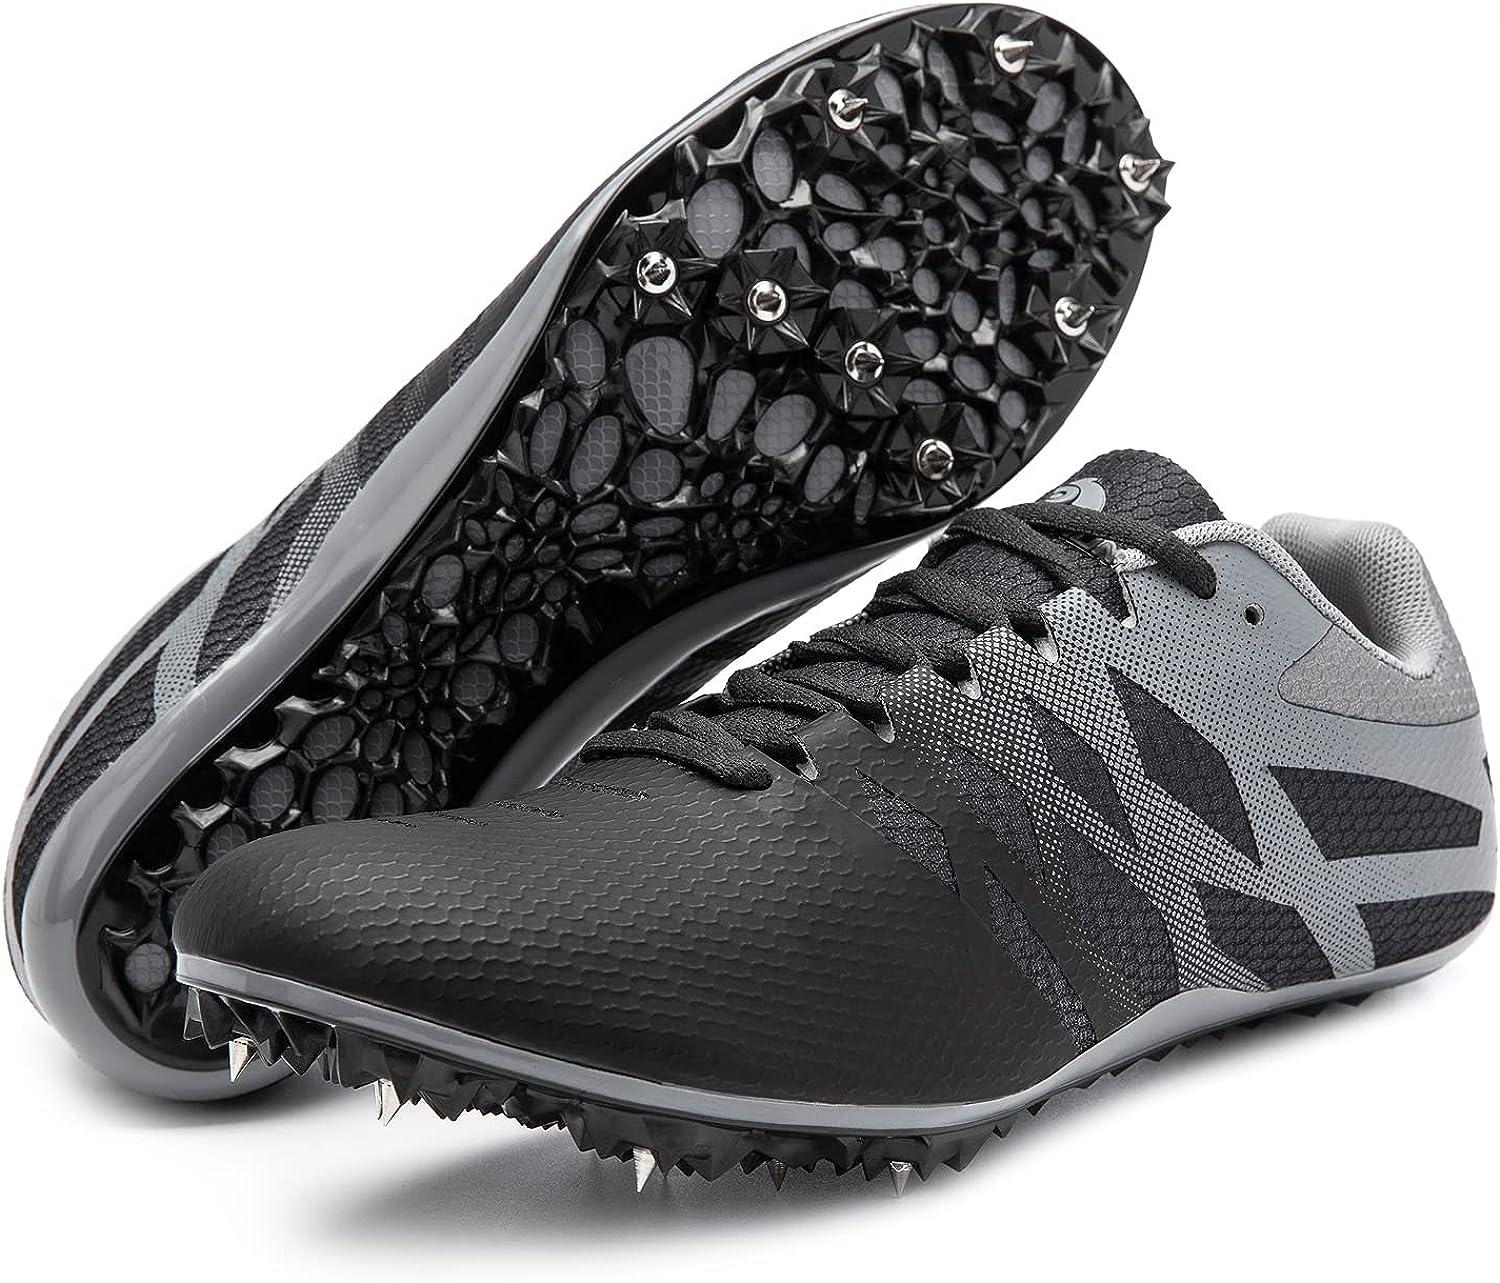  kcross Track Shoes Men Womens Track Spikes Shoes, Track Spikes  Men, Track and Field Shoes for Sprinting, Track Cleats for Kids Boys Youth  Black